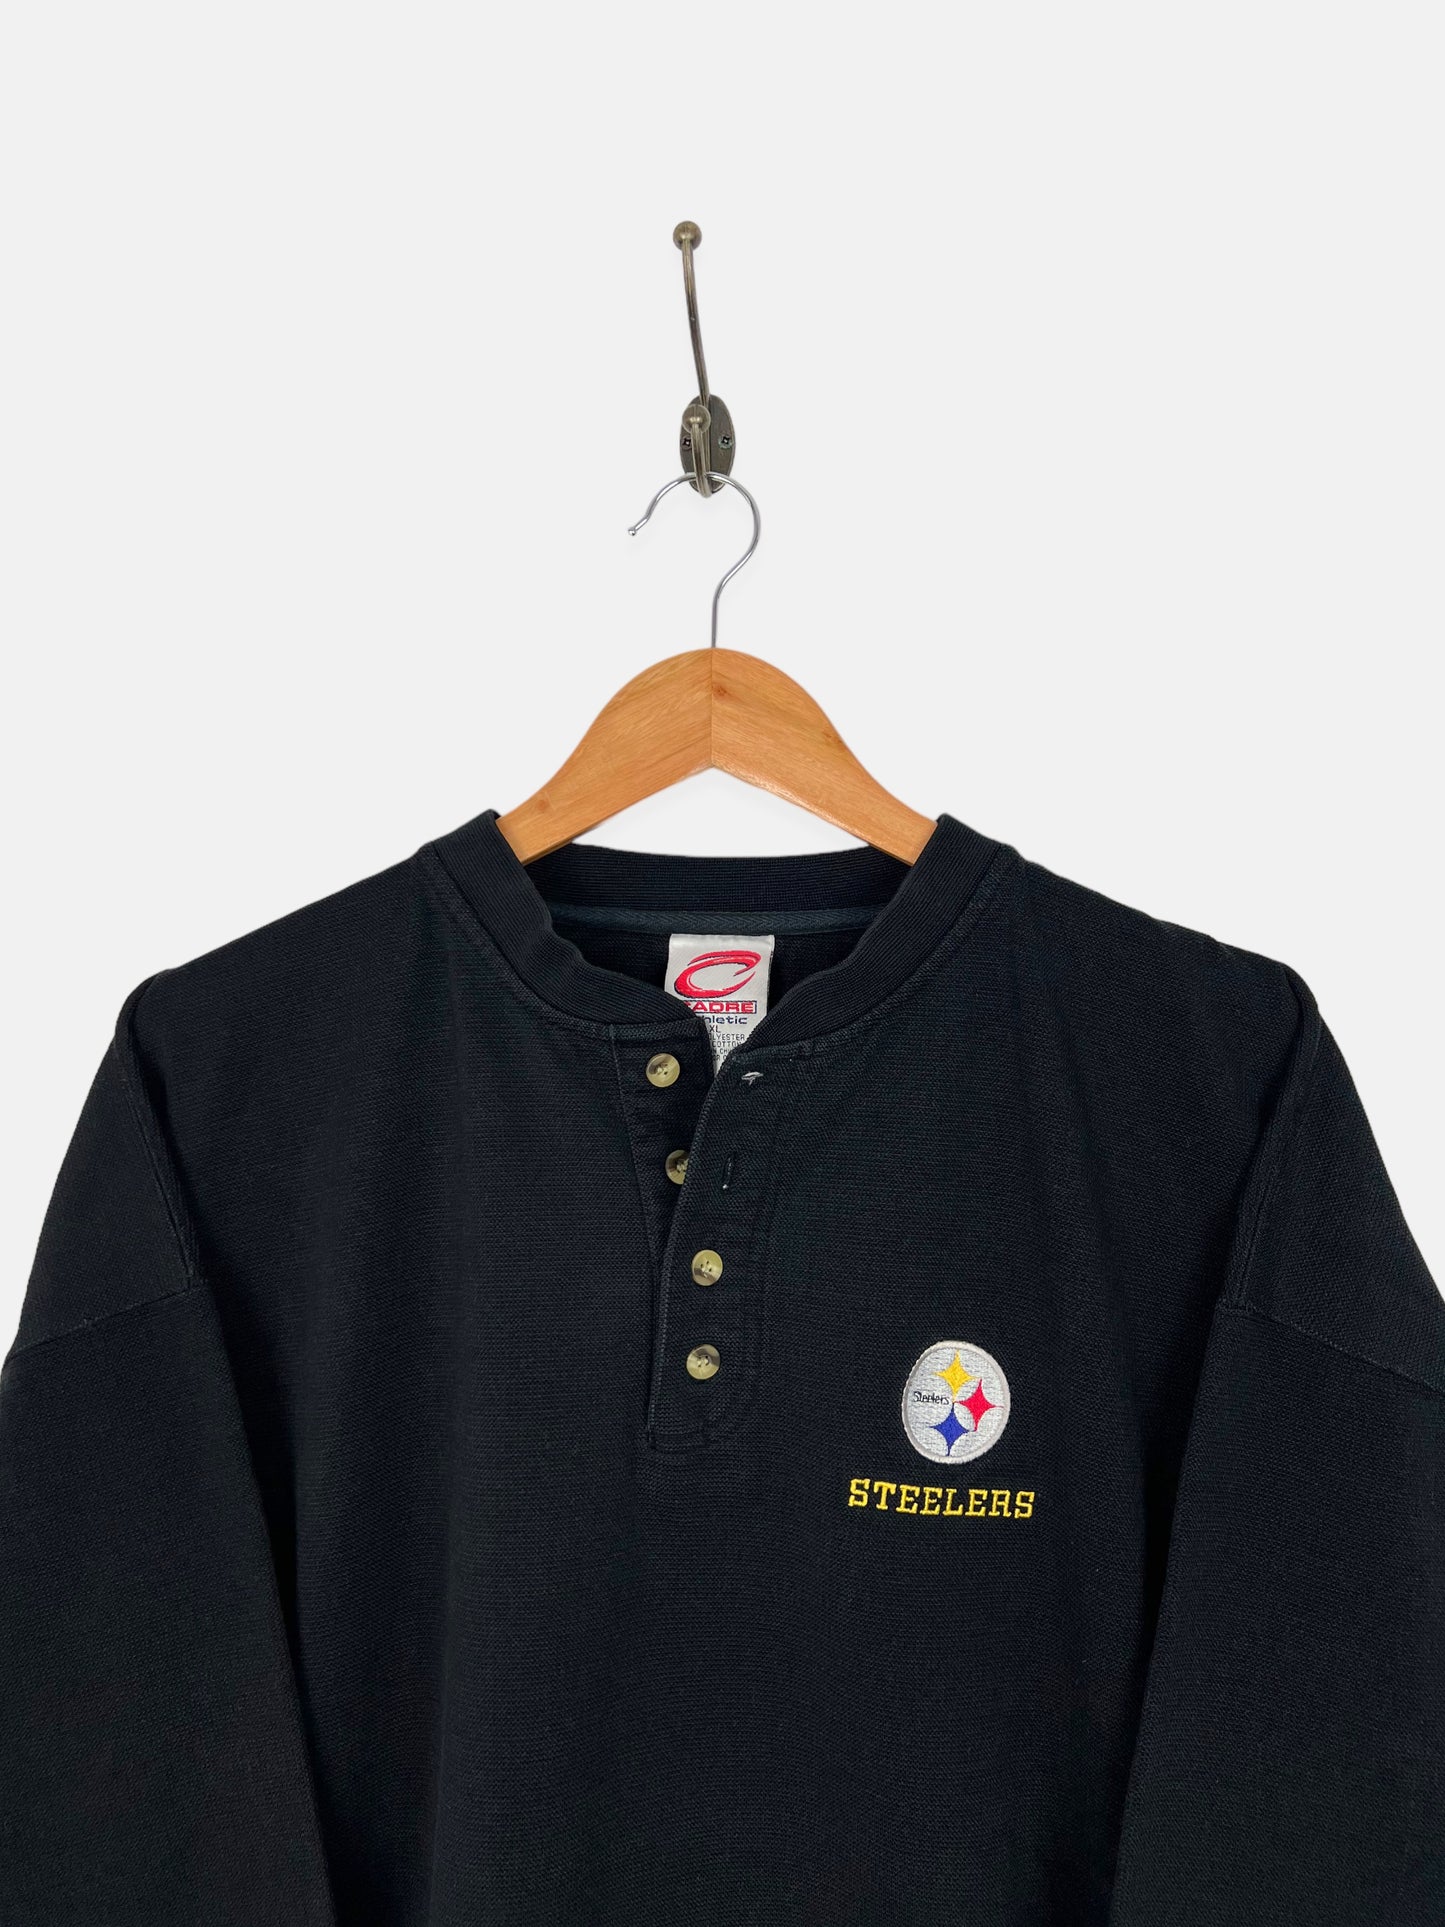 90's Pittsburgh Steelers NFL Embroidered Vintage Sweatshirt Size L-XL